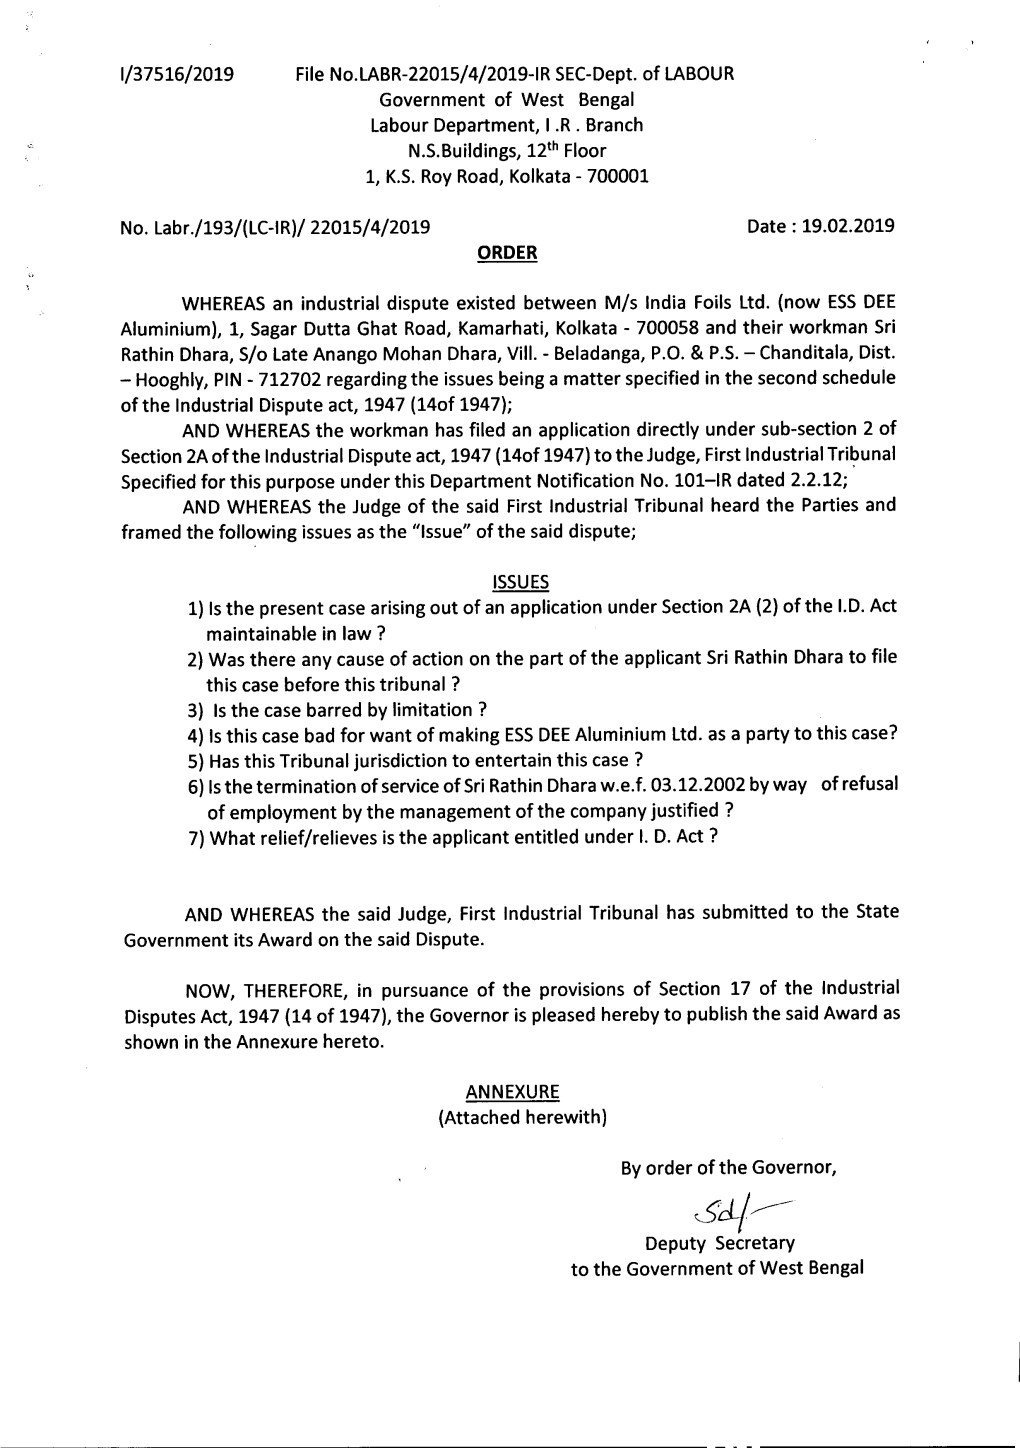 Cl/~ Deputy Secretary to the Government of West Bengal ( 2 )